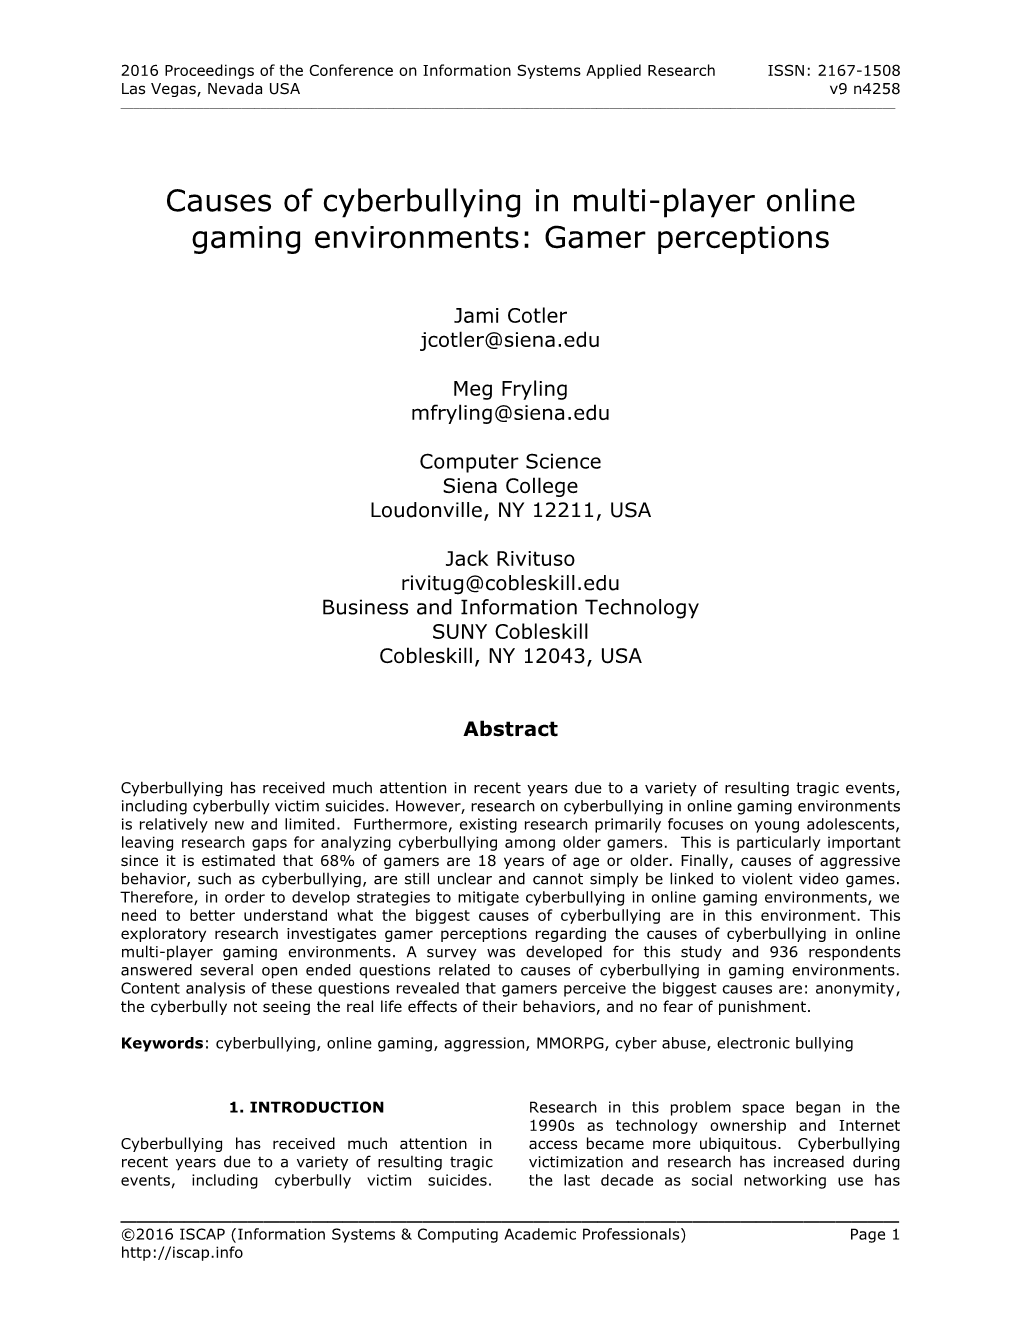 Causes of Cyberbullying in Multi-Player Online Gaming Environments: Gamer Perceptions